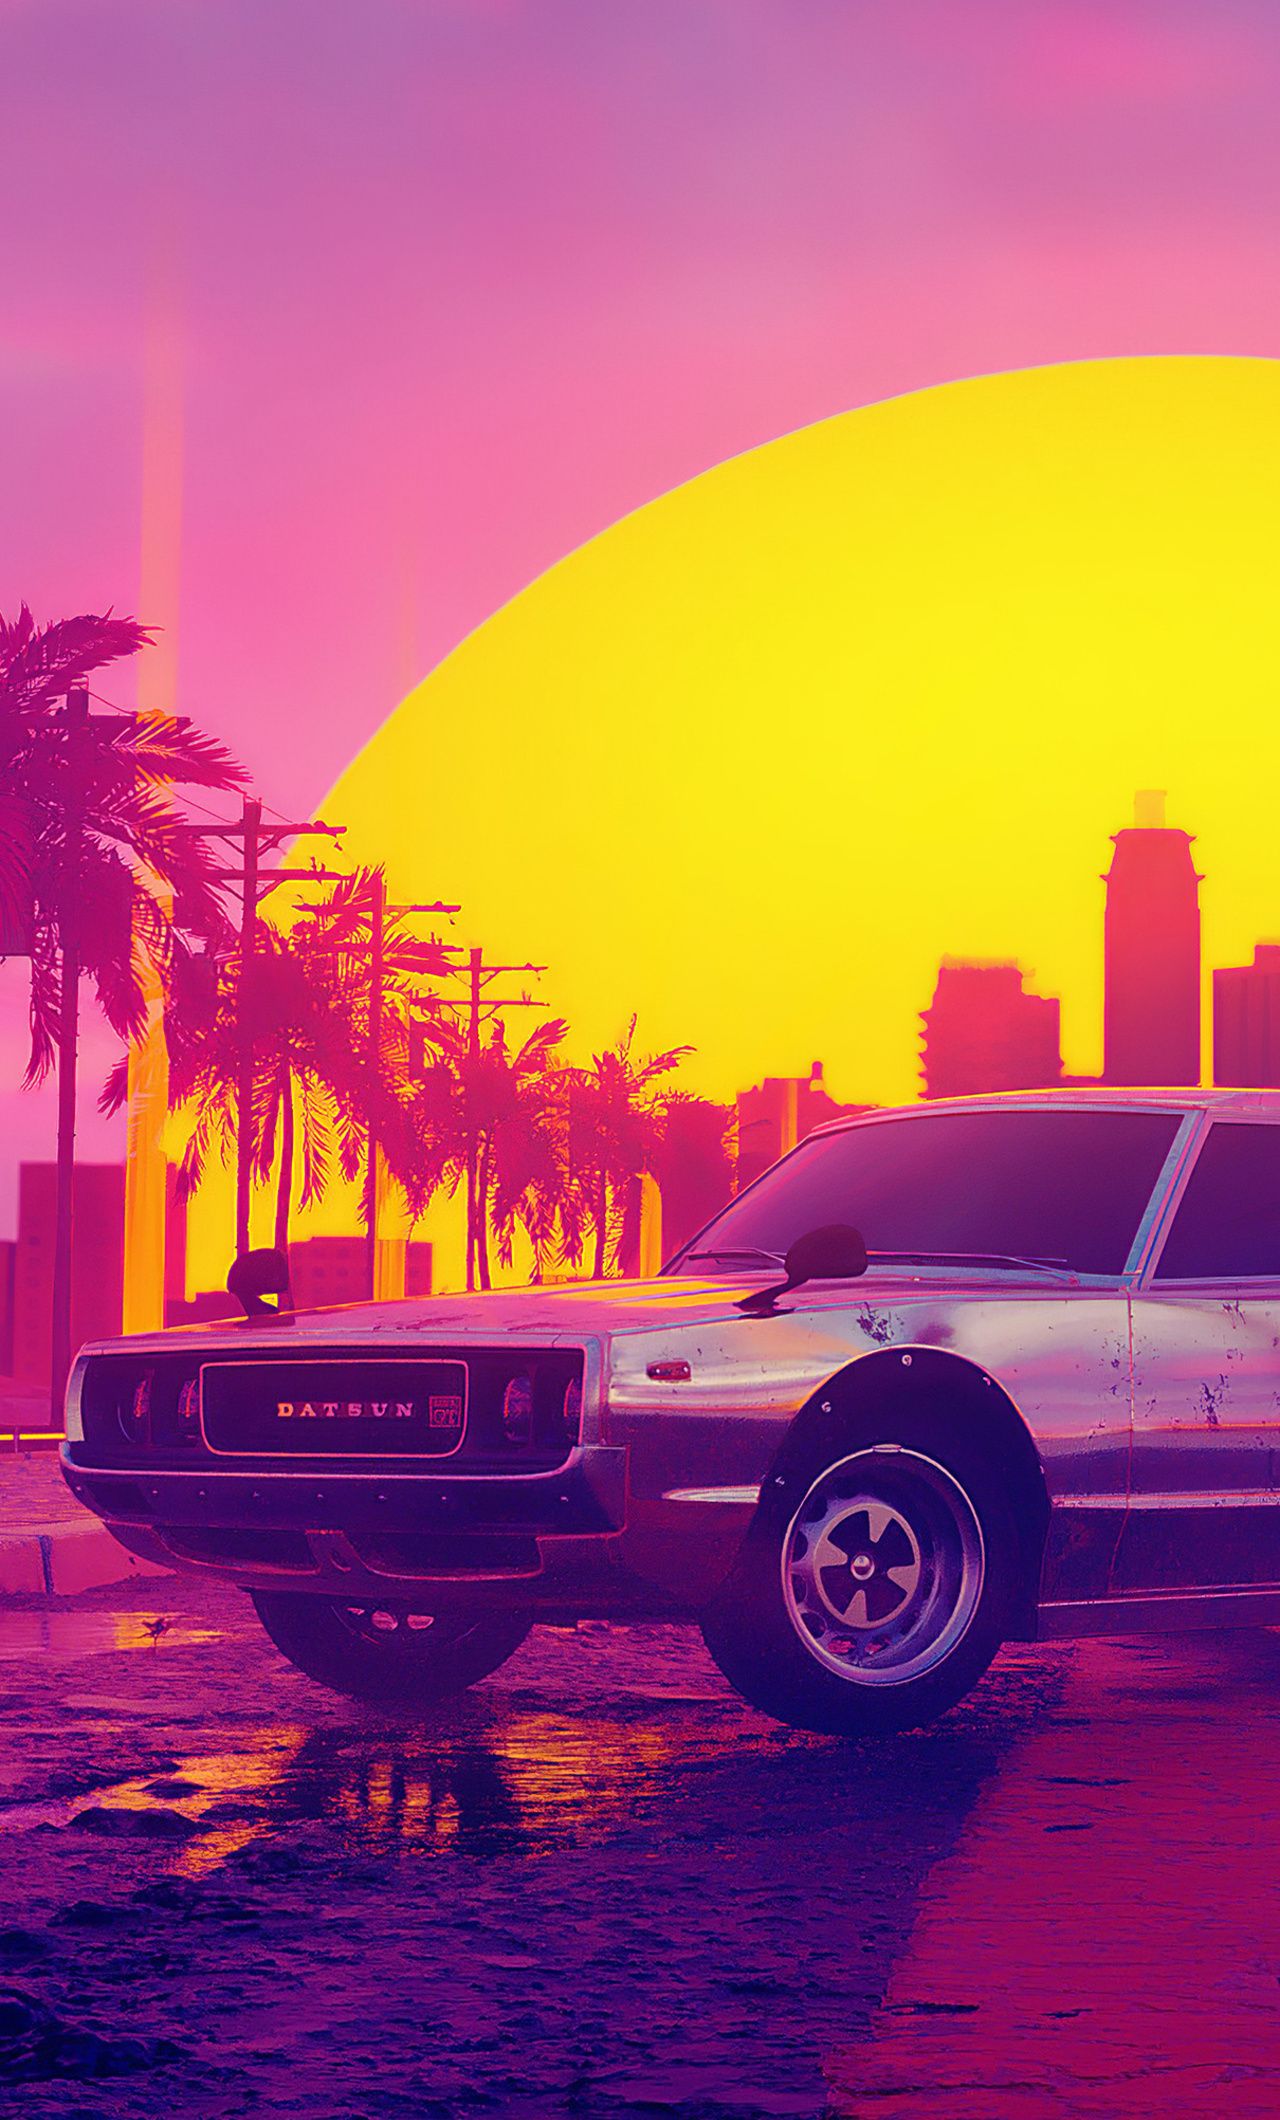 Vice City Wallpaper Free Vice City Background